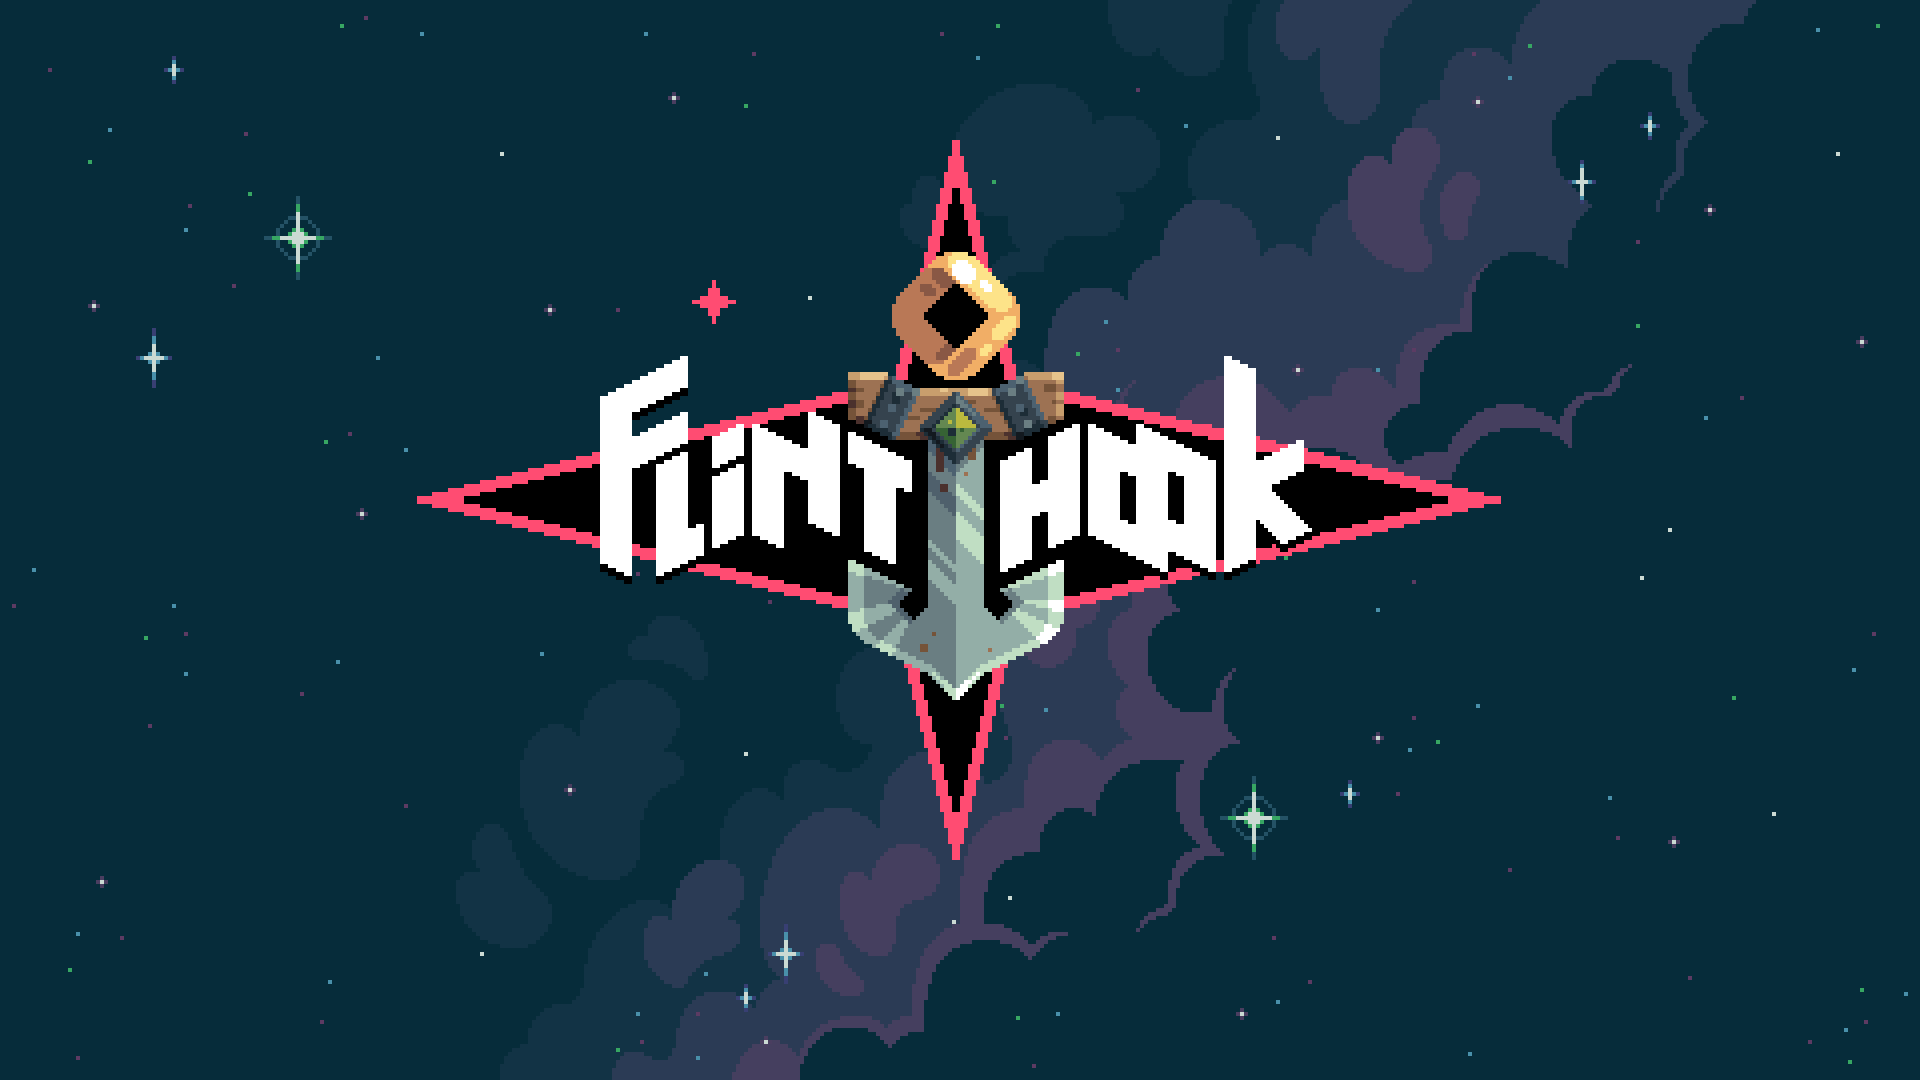 Flinthook Review: Plunderer of Your Heart